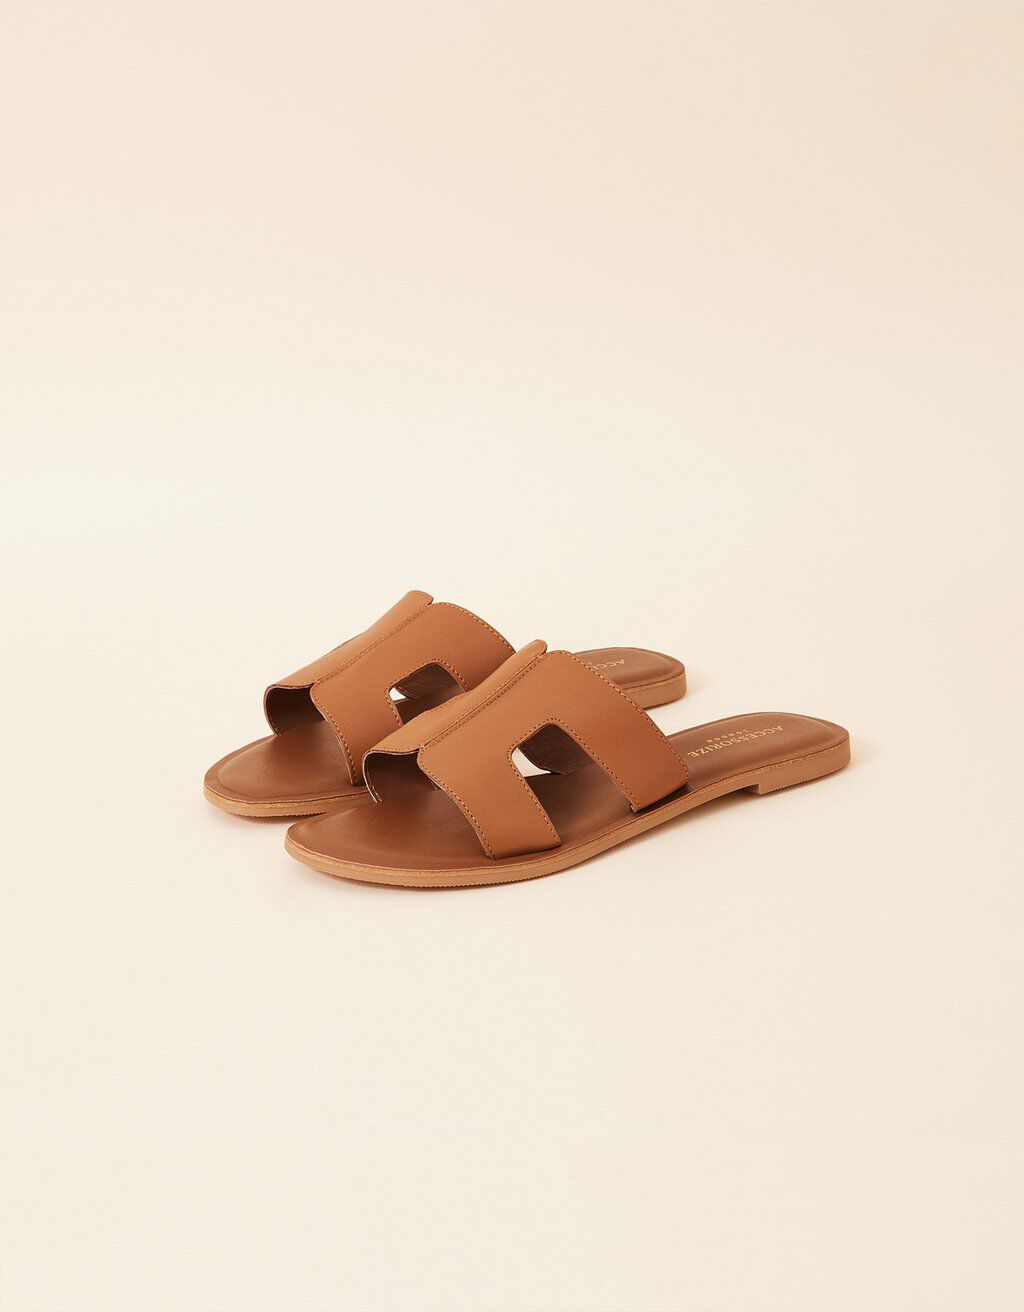 Accessorize Leather Cut-Out Detail Sliders Sandals | Heathrow Reserve ...